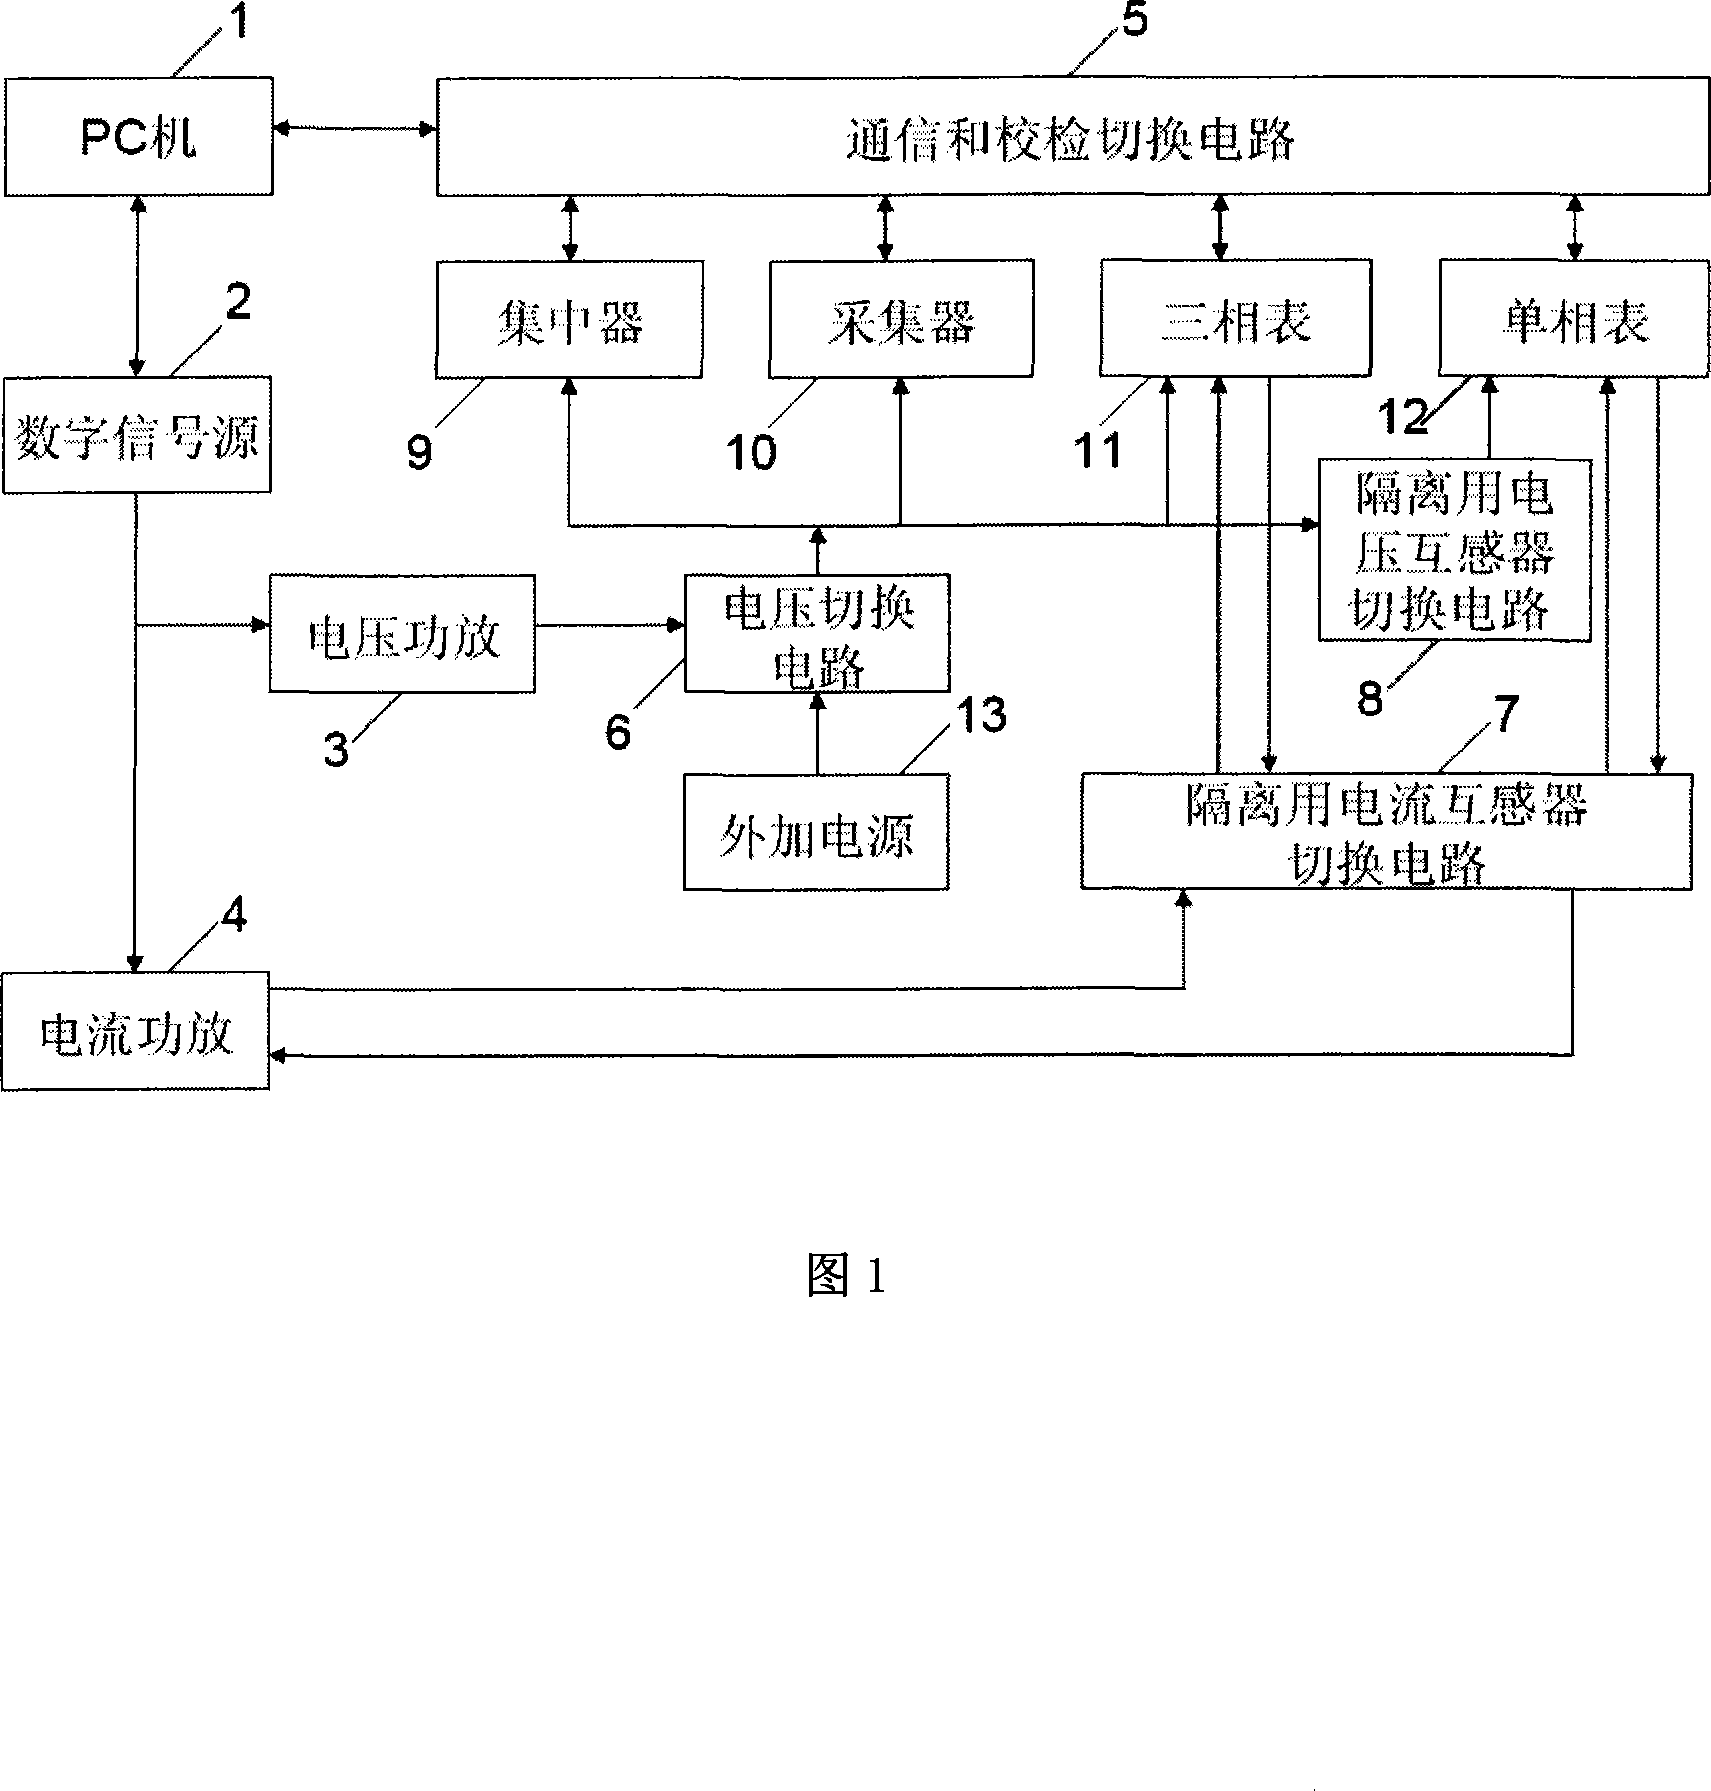 Undervoltage collection copy system detecting device based on virtual electric energy meter module